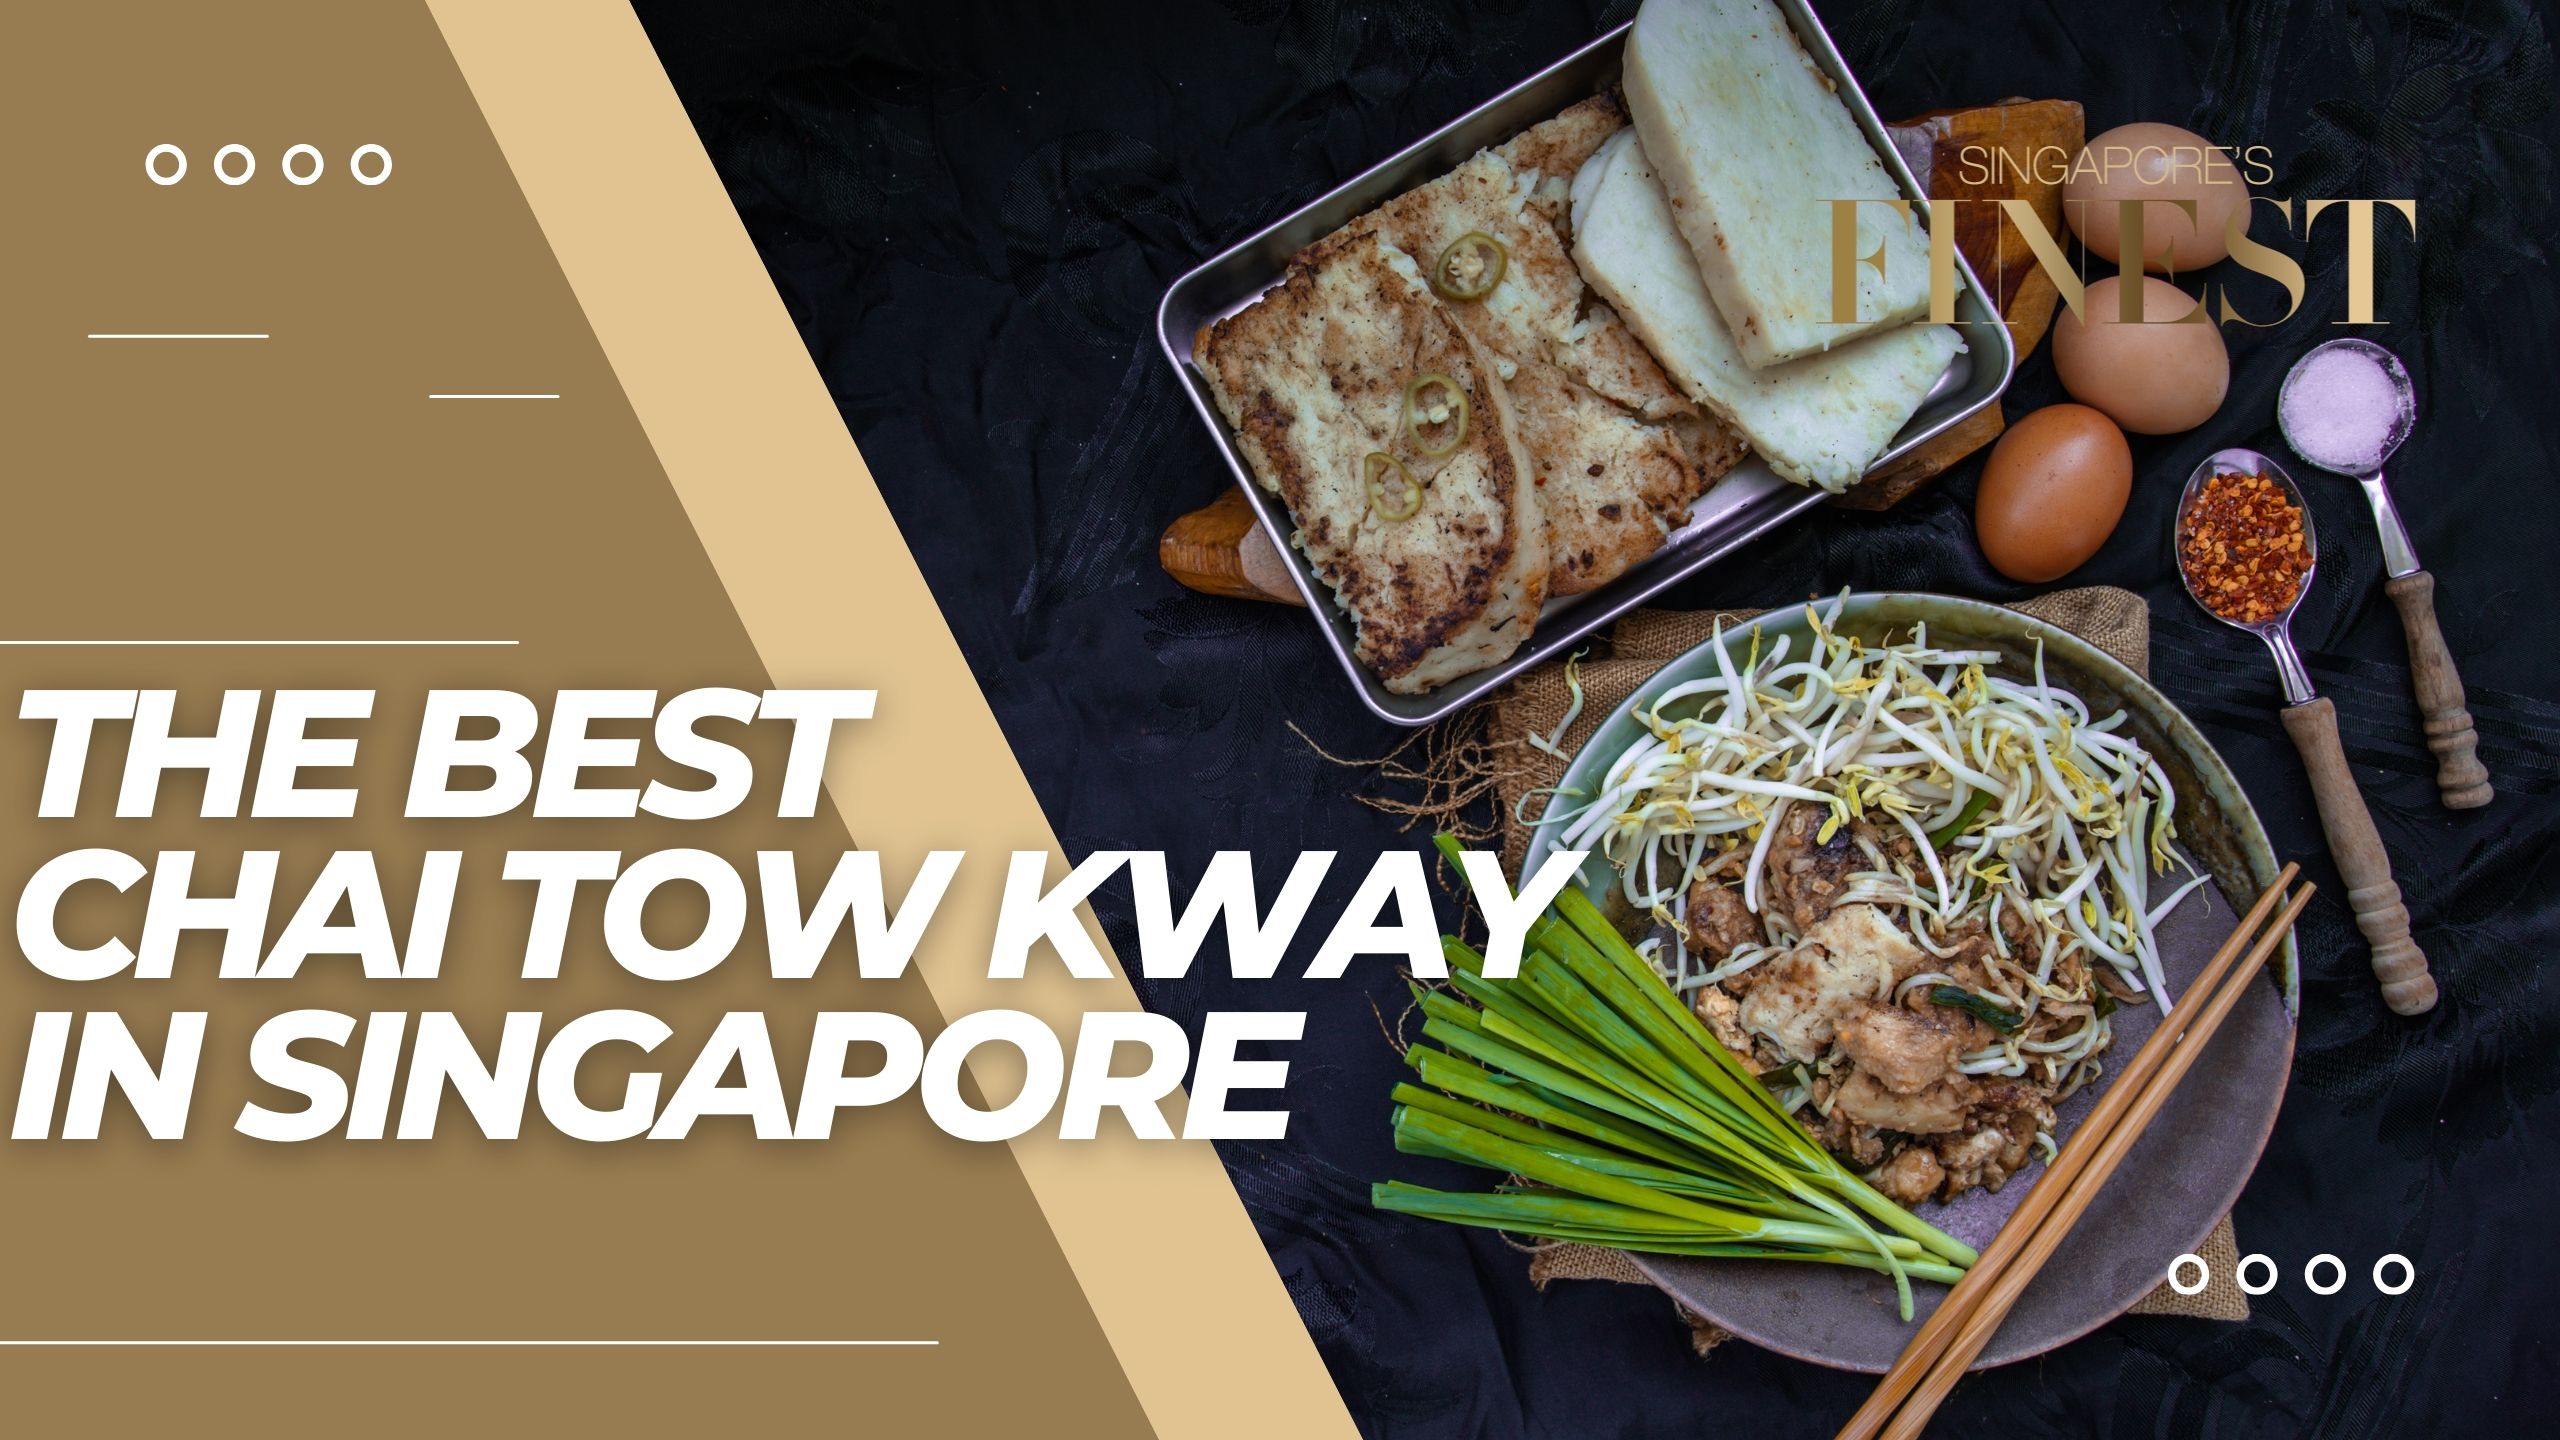 The Finest Chai Tow Kway in Singapore